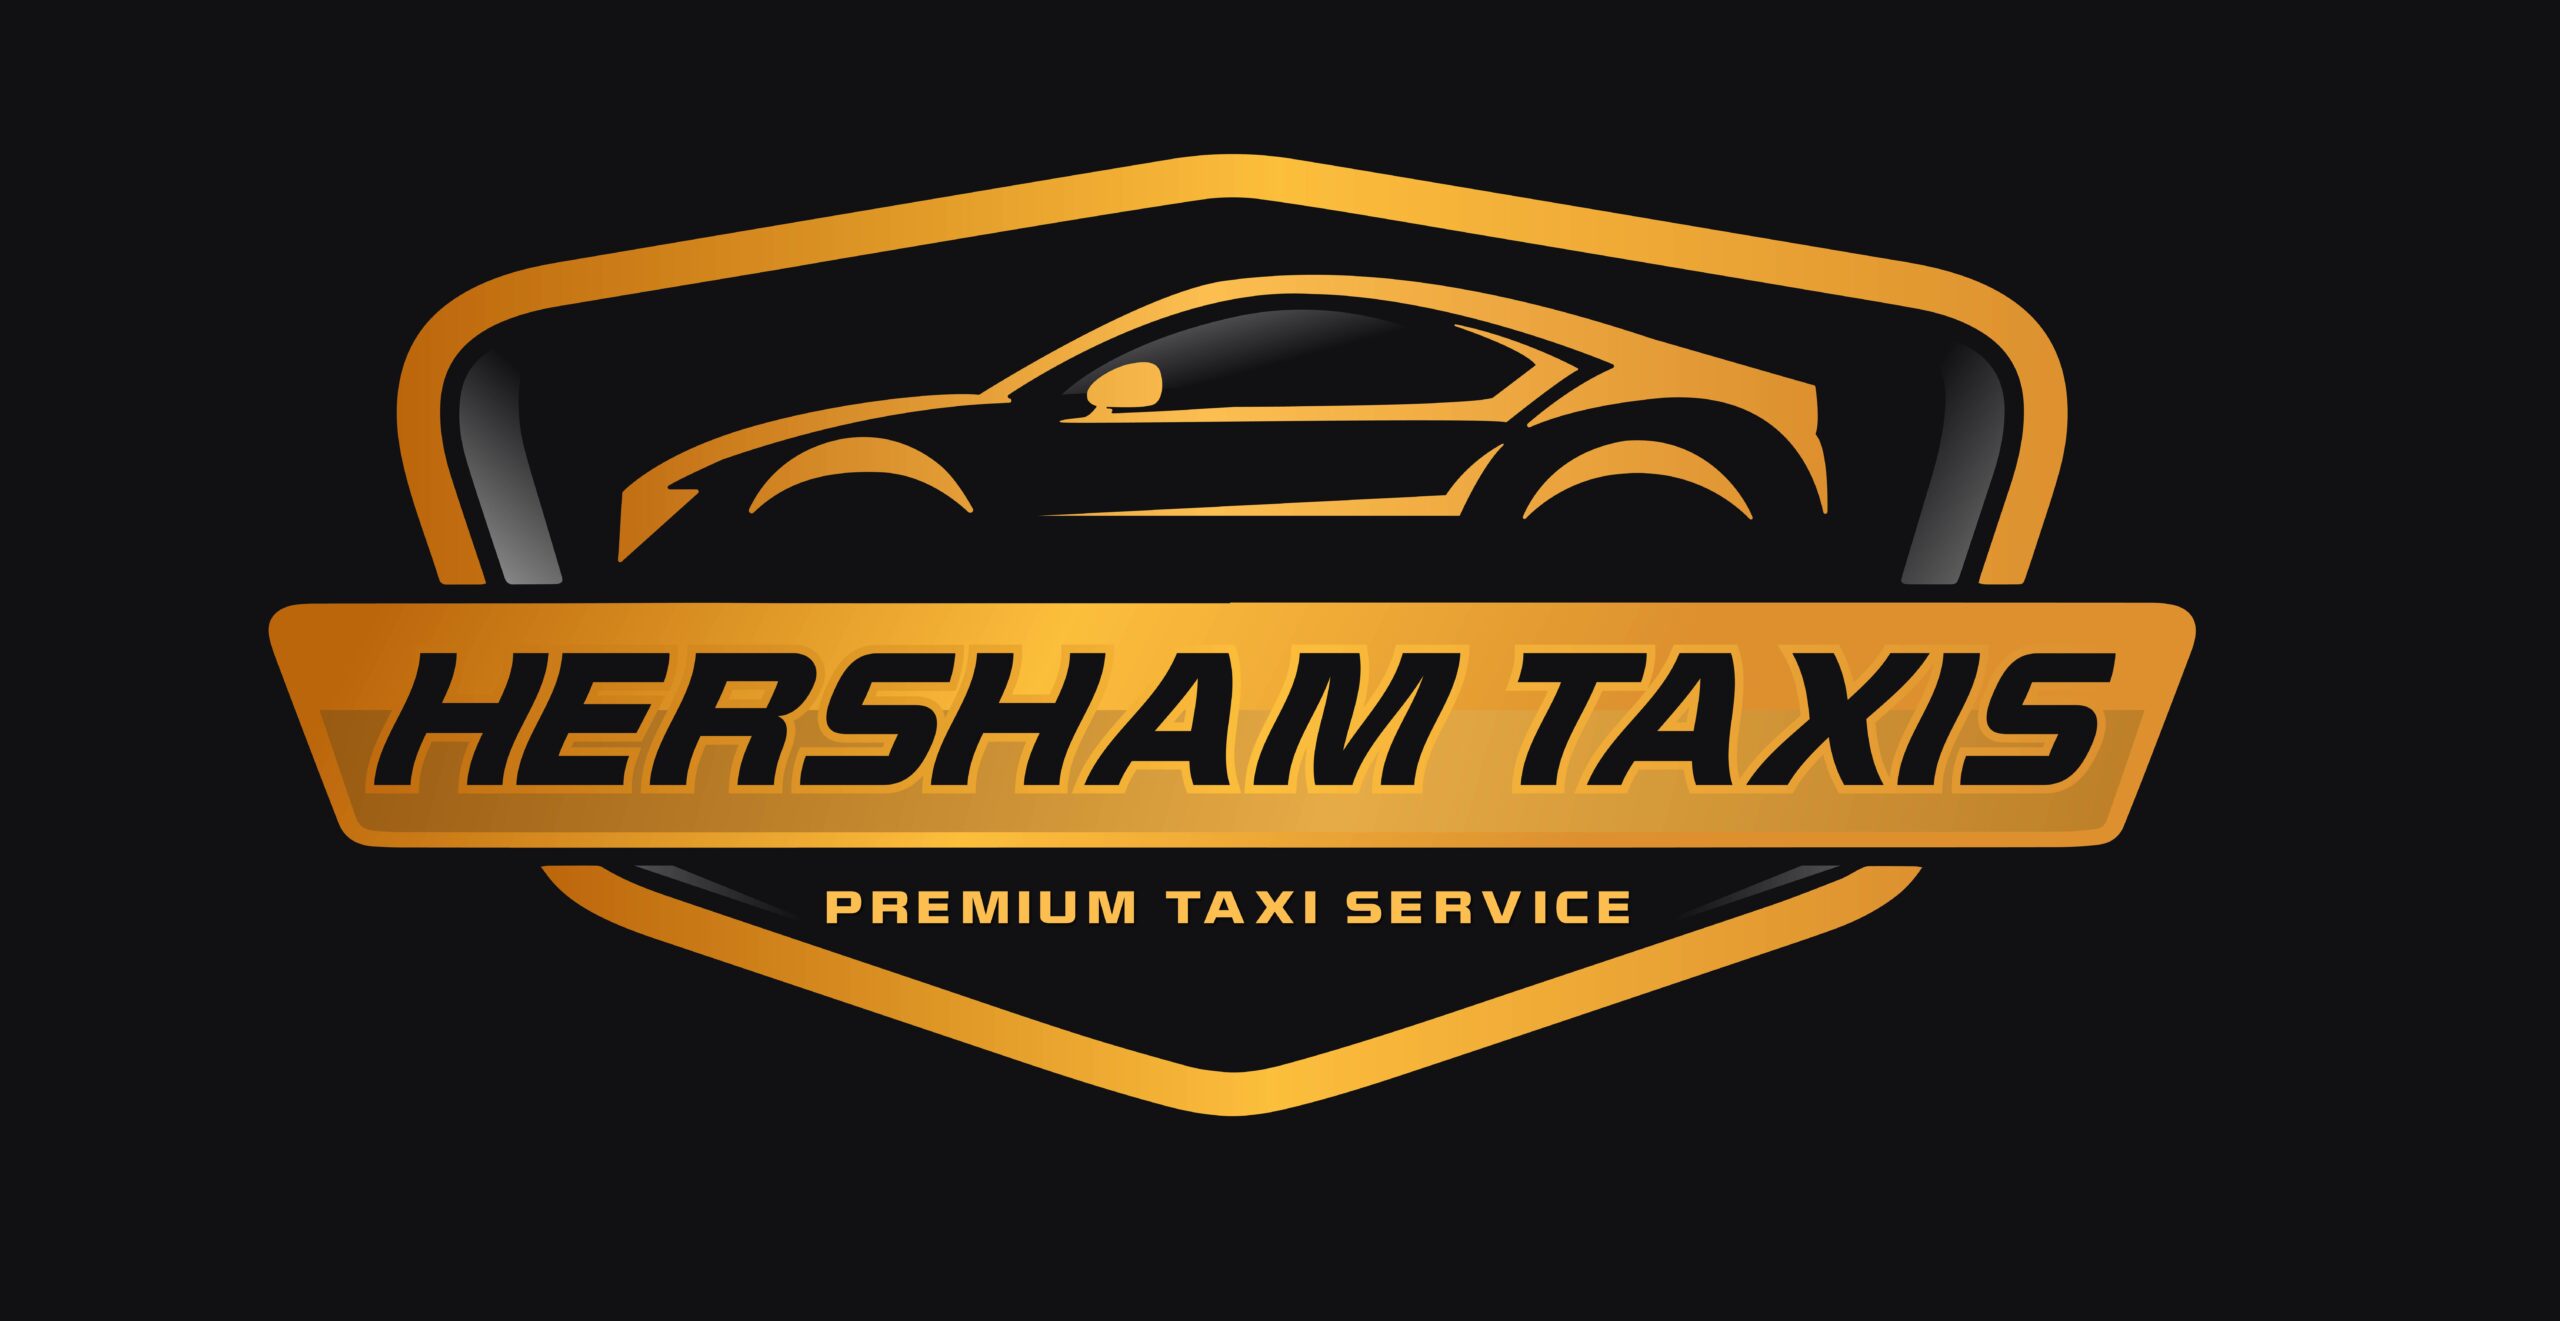 24 Hours Taxi Services in Bangalore - Cab Services - Justdial